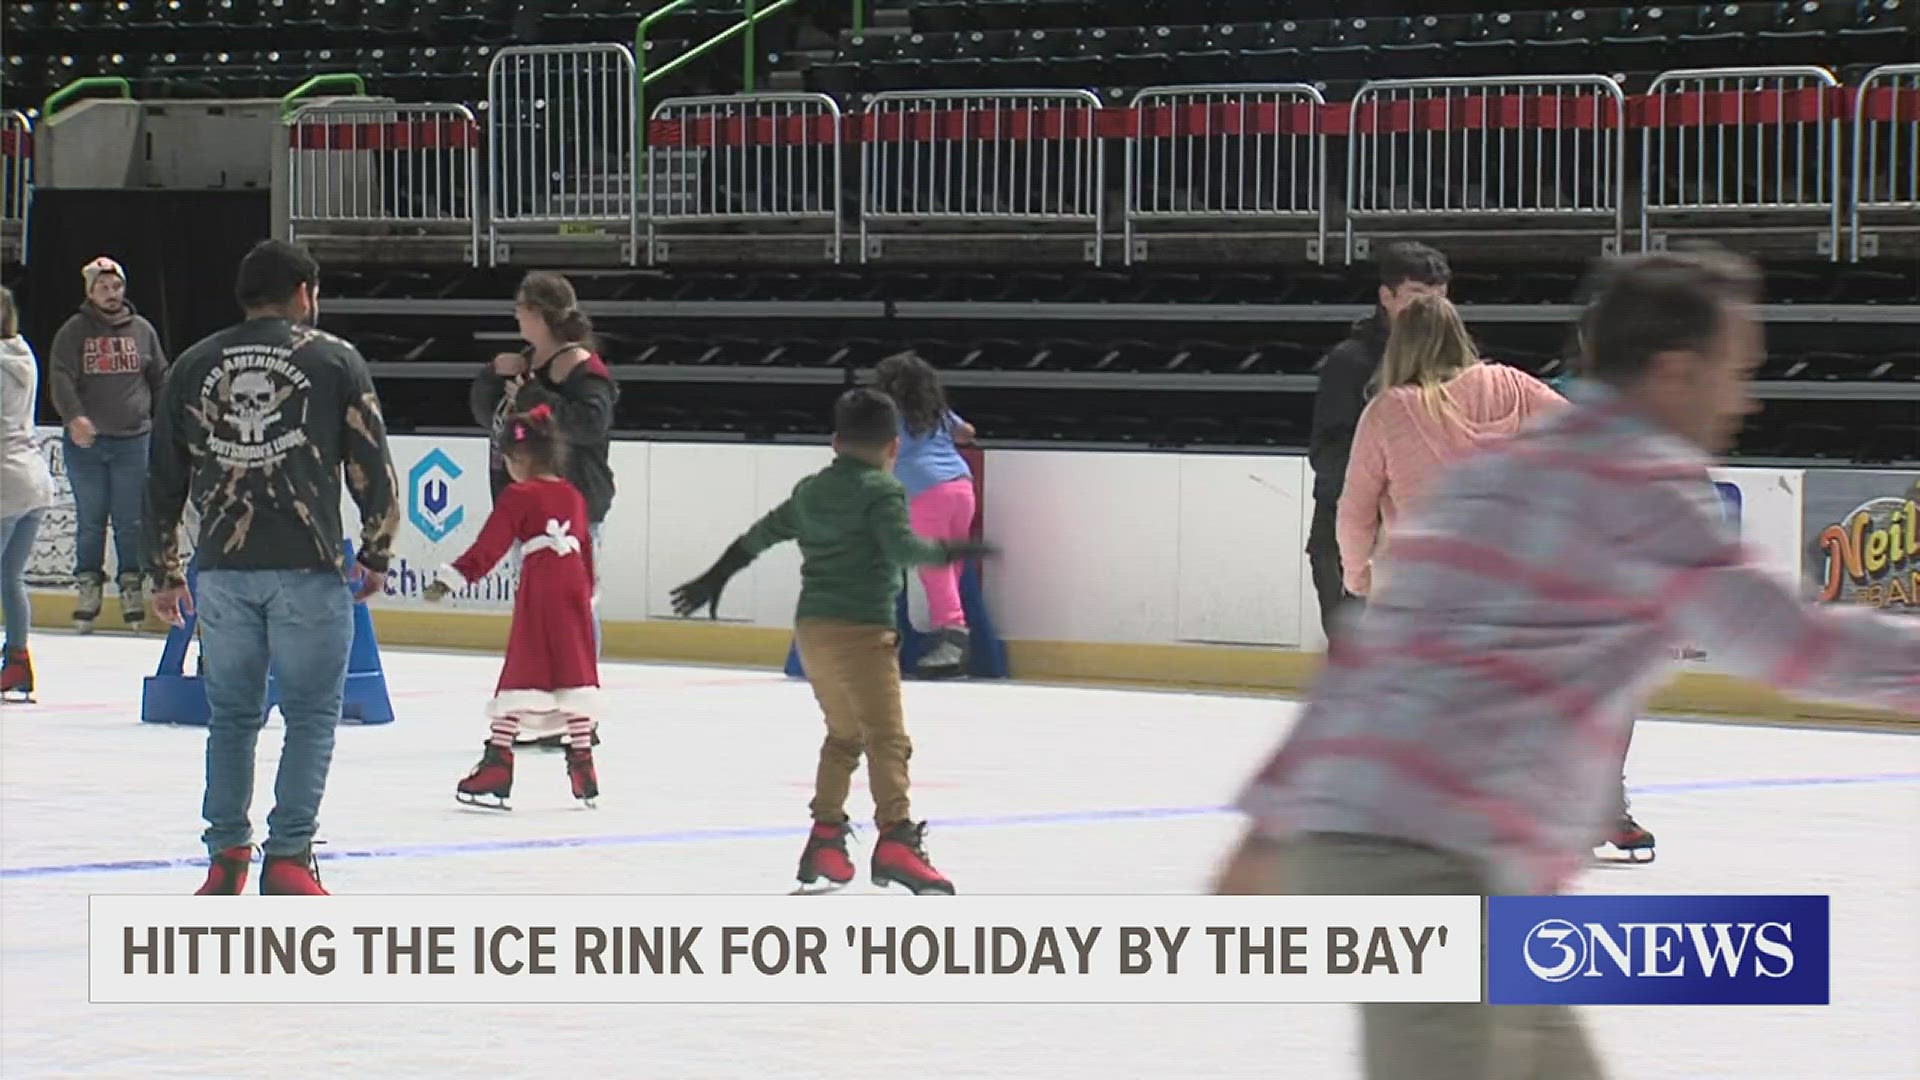 The event put on by the city as a way to bring the winter holiday experience to south Texas.